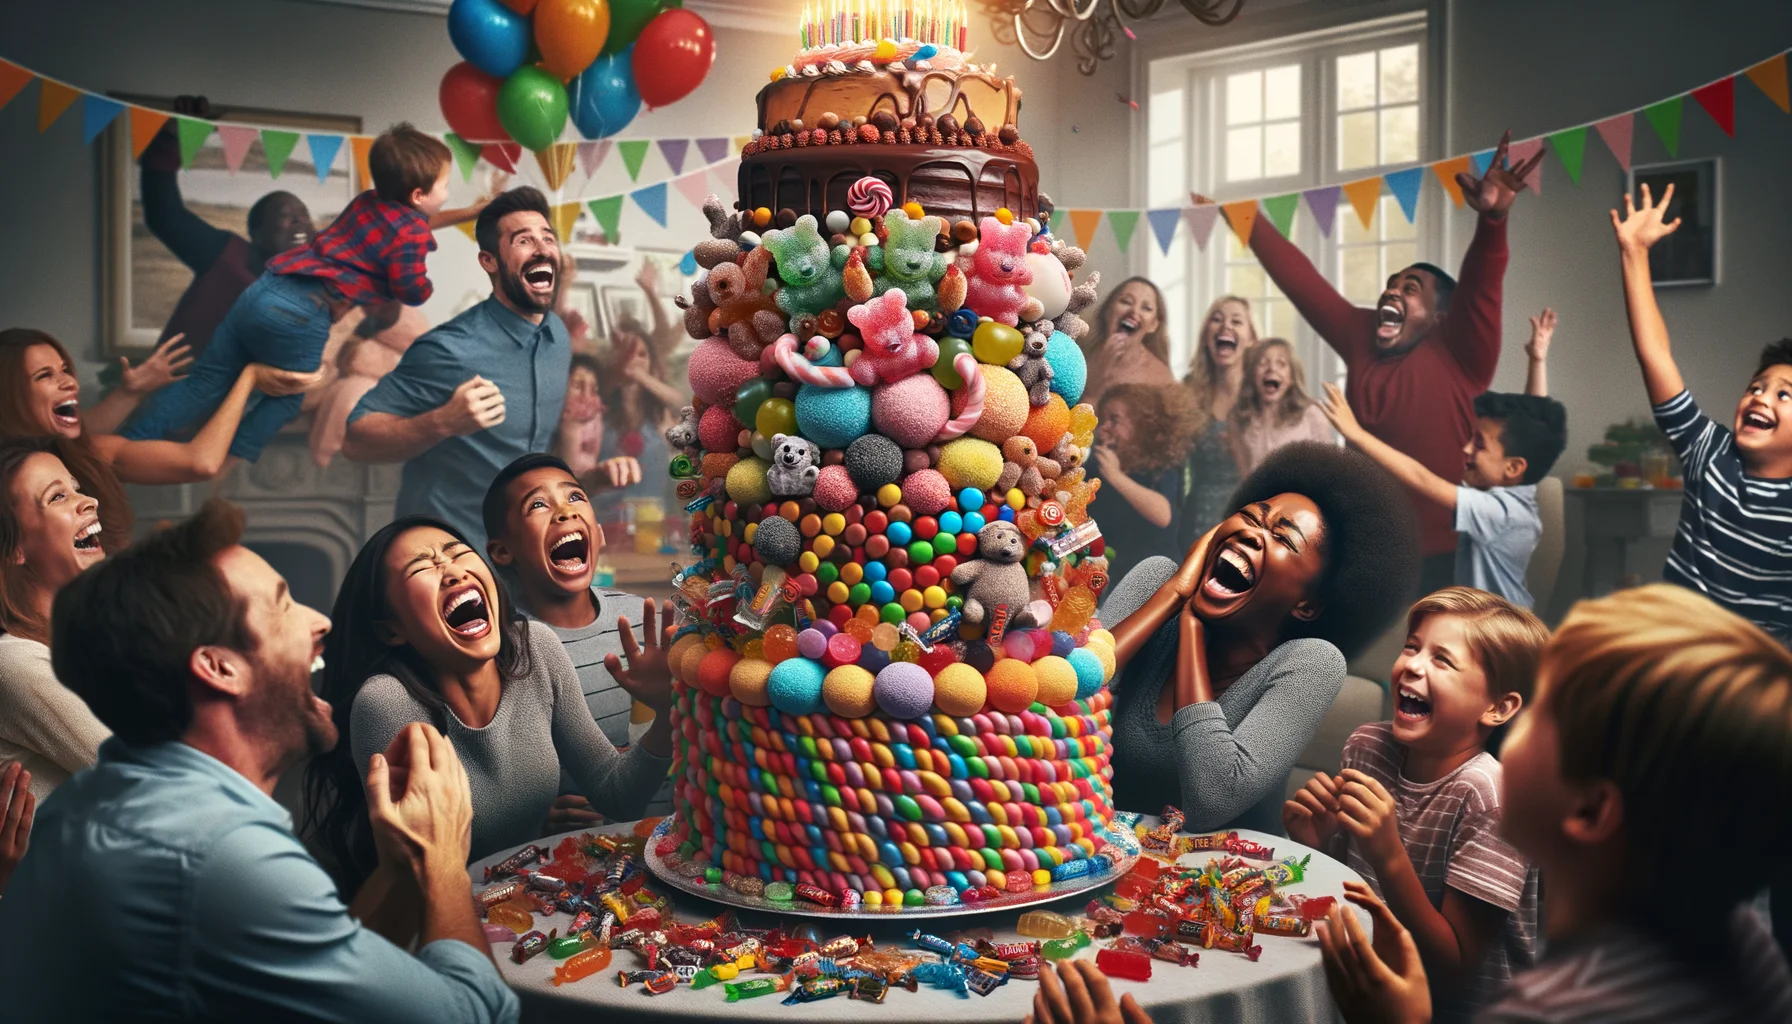 Picture a hilarious situation taking place at a birthday party. The centerpiece of this pandemonium is a gigantic, somewhat ludicrous, multi-layer birthday cake standing tall. It is adorned with far too many colorful sugary candies, ranging from gummy bears to lollipops, causing it to tilt precariously. Laughter echoes throughout the room filled with a diverse group of party-goers. A petite South Asian woman laughs heartily as she tries to steady the cake, while a tall Black man chuckles, nervously anticipating the cake's potential downfall. In the background, children of various descents are gleefully engaged in a frenzied hunt for more candy, their joy heightened by the absurdity of the situation.